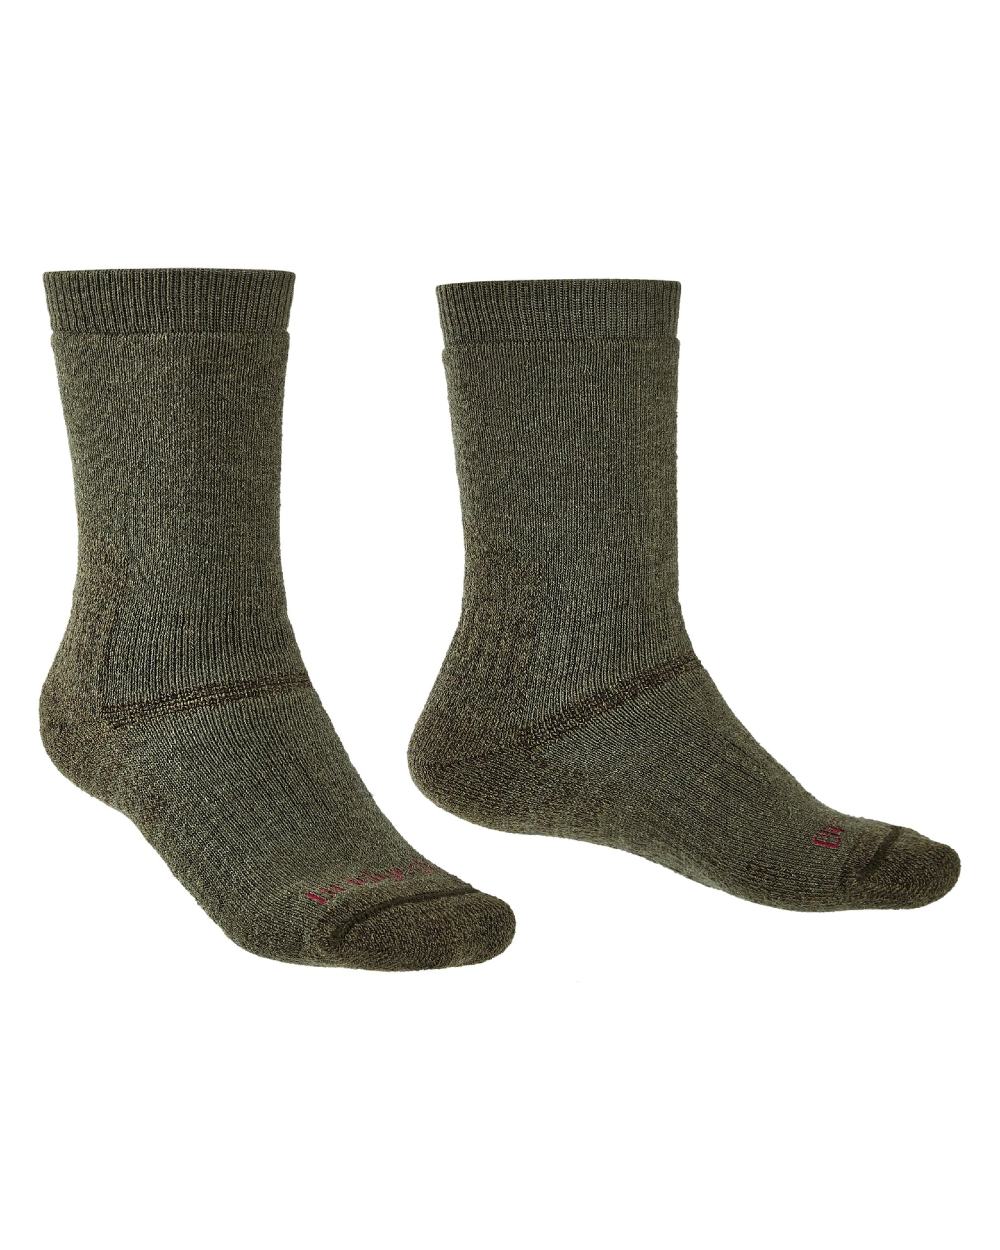 Front of Olive coloured Bridgedale Heavyweight Merino Performance Socks on a white background 